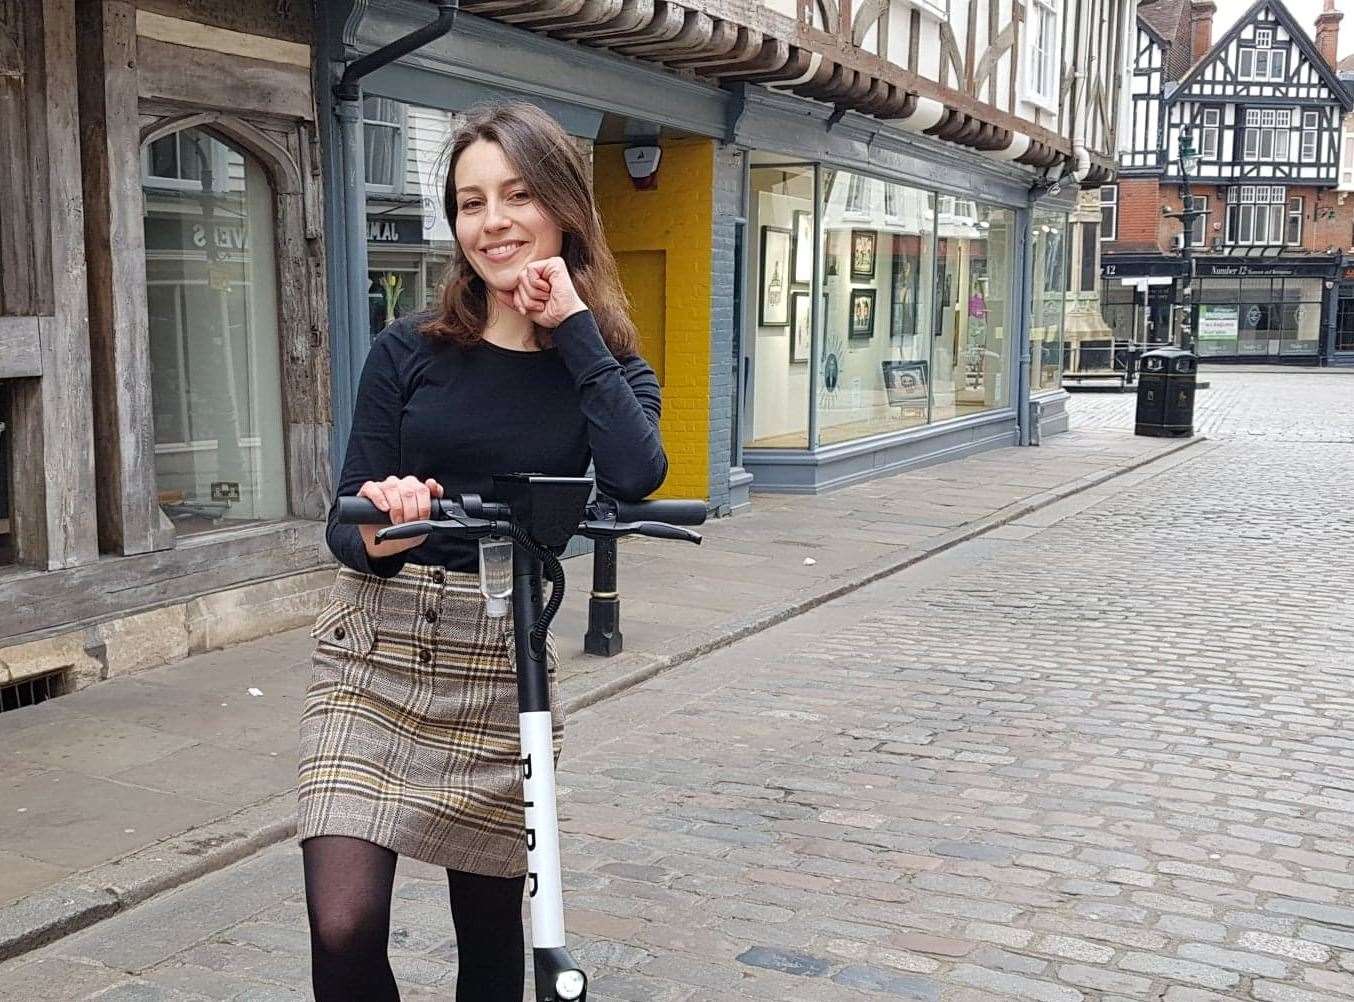 Reporter Lydia Chantler-Hicks tried out Canterbury's e scooters